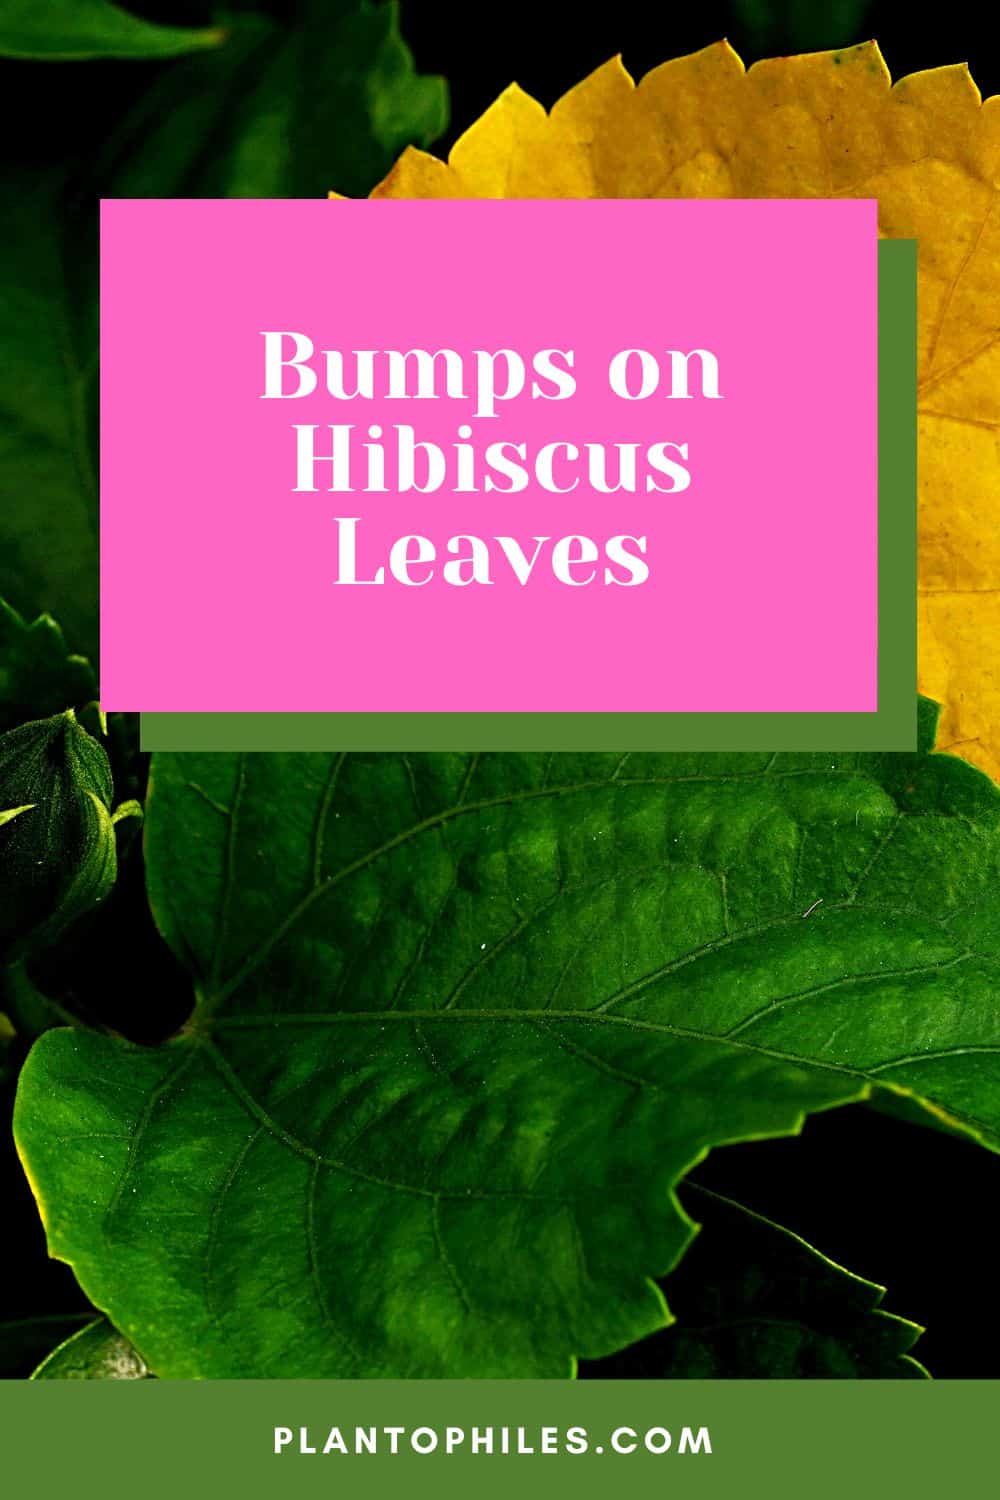 Bumps on Hibiscus Leaves